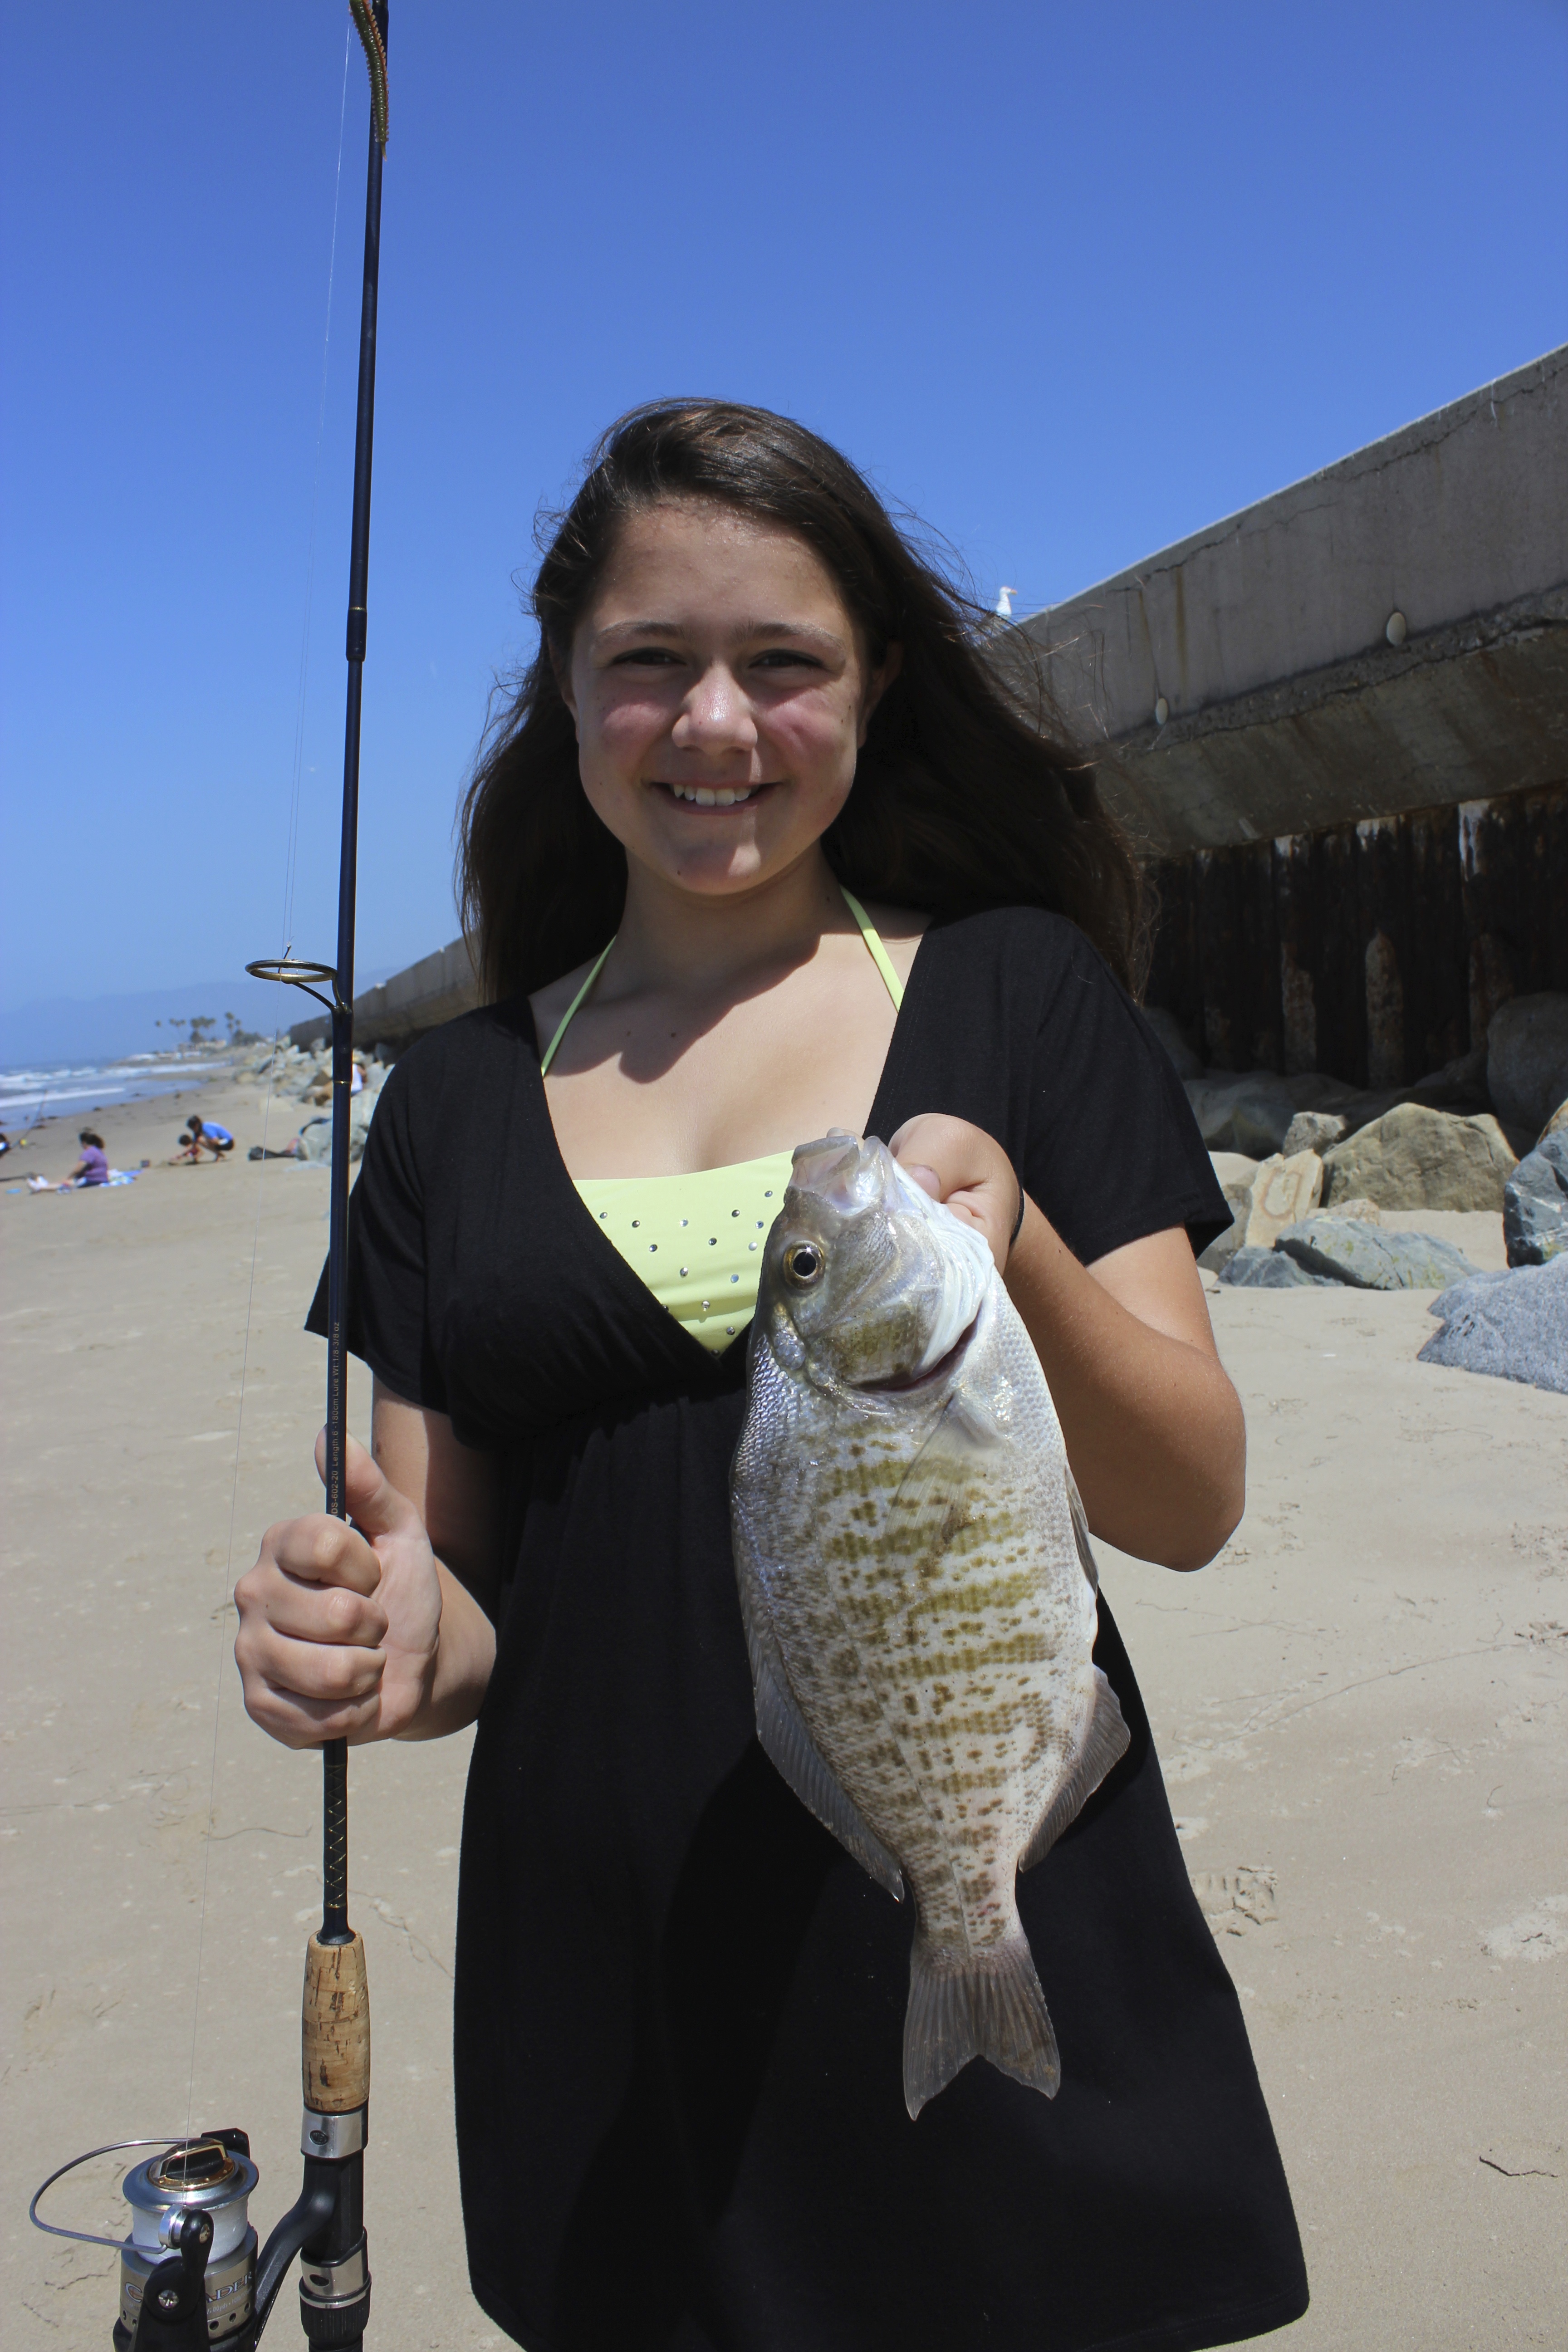 Early spring surfperch